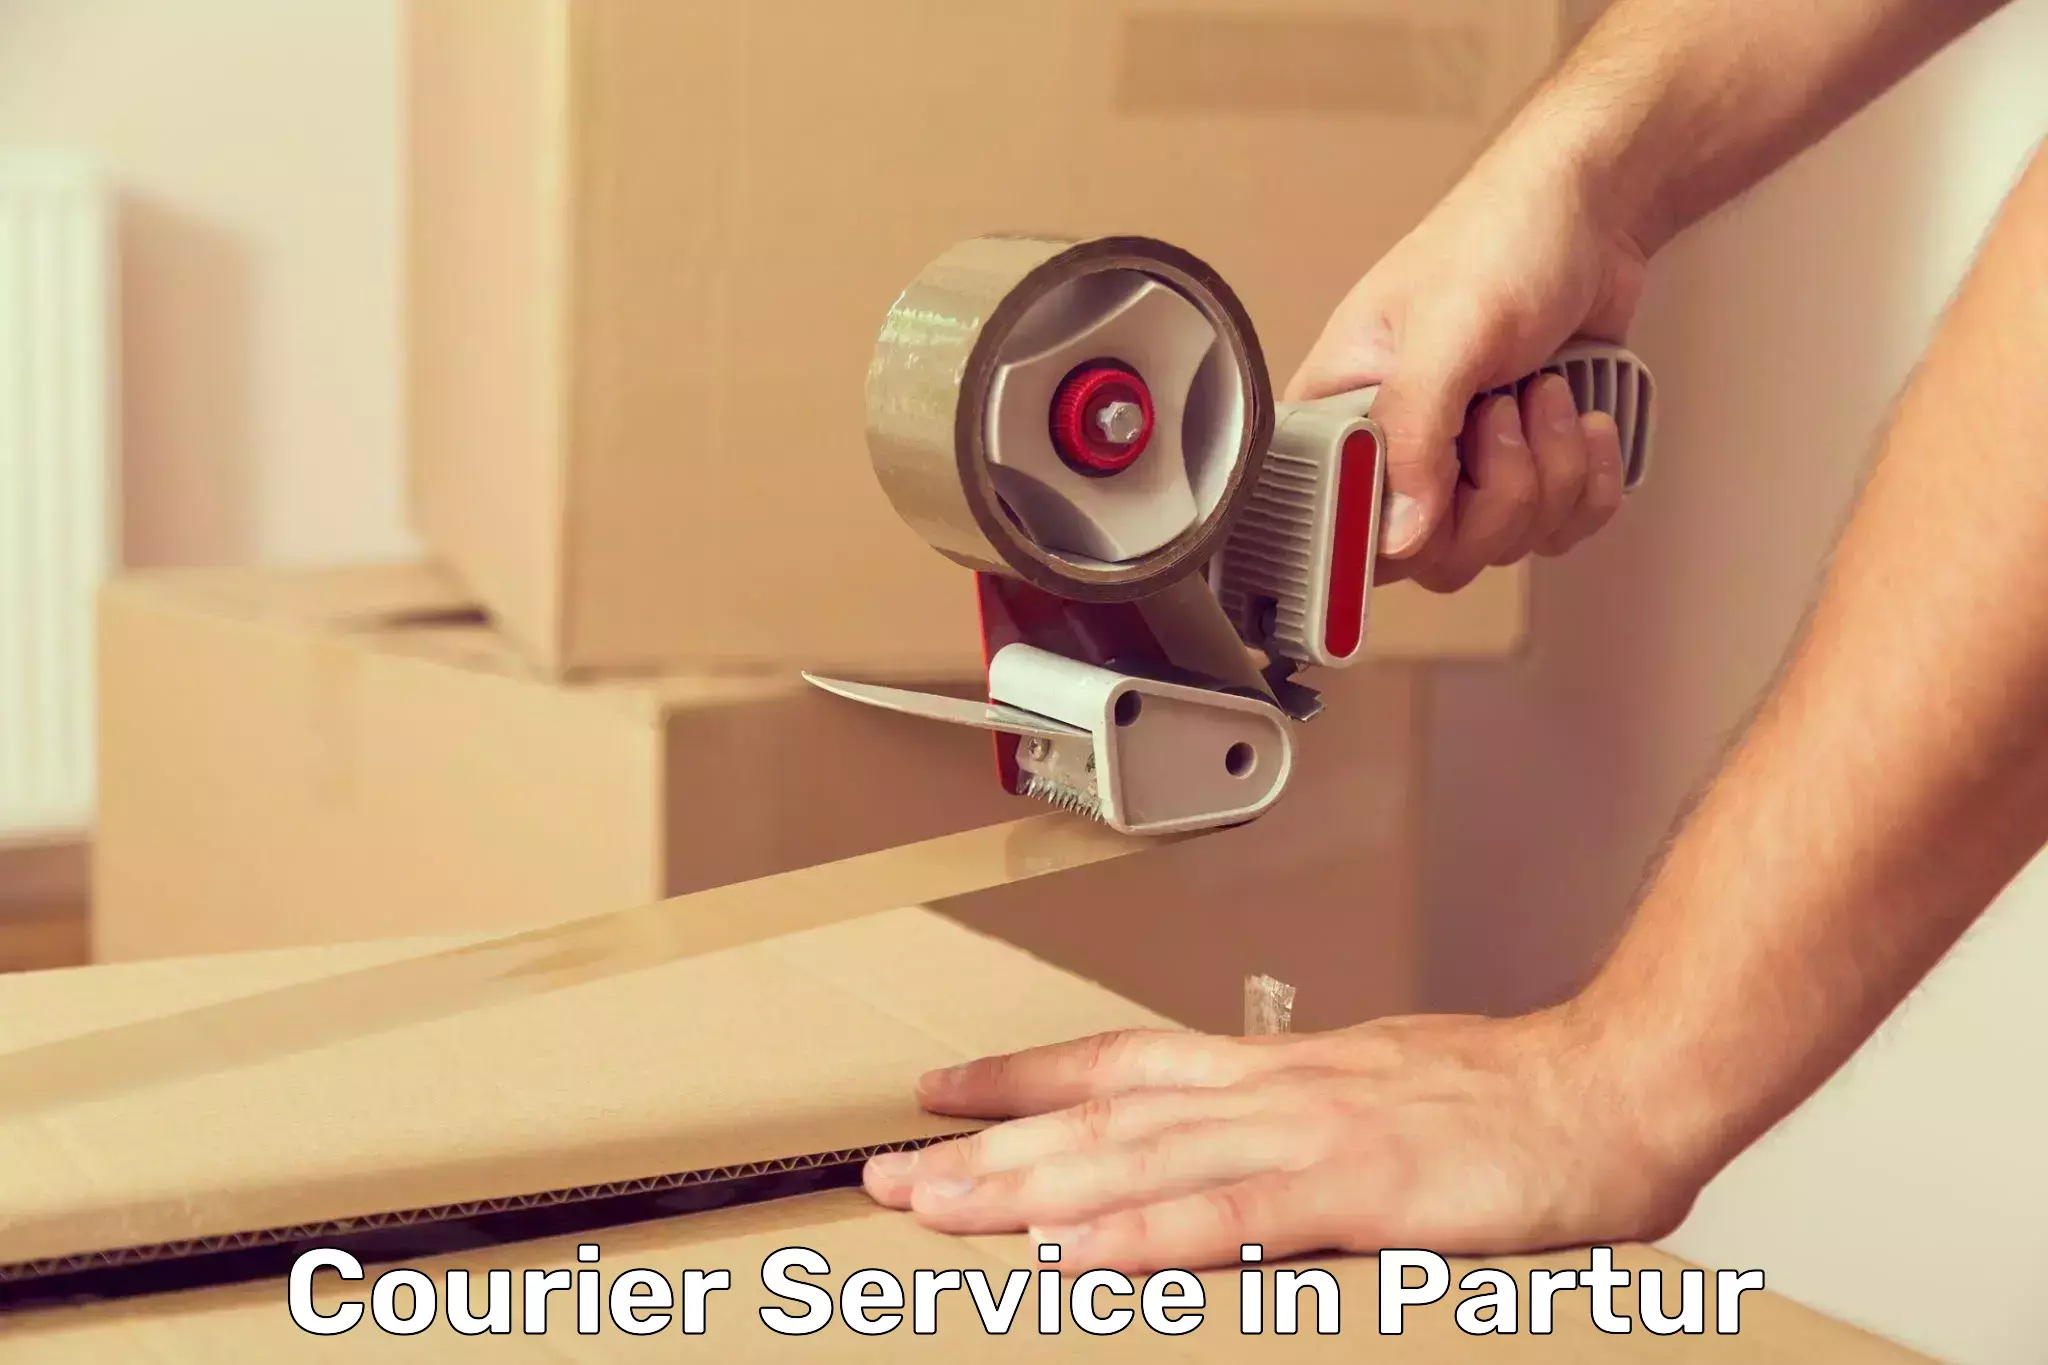 Flexible shipping options in Partur